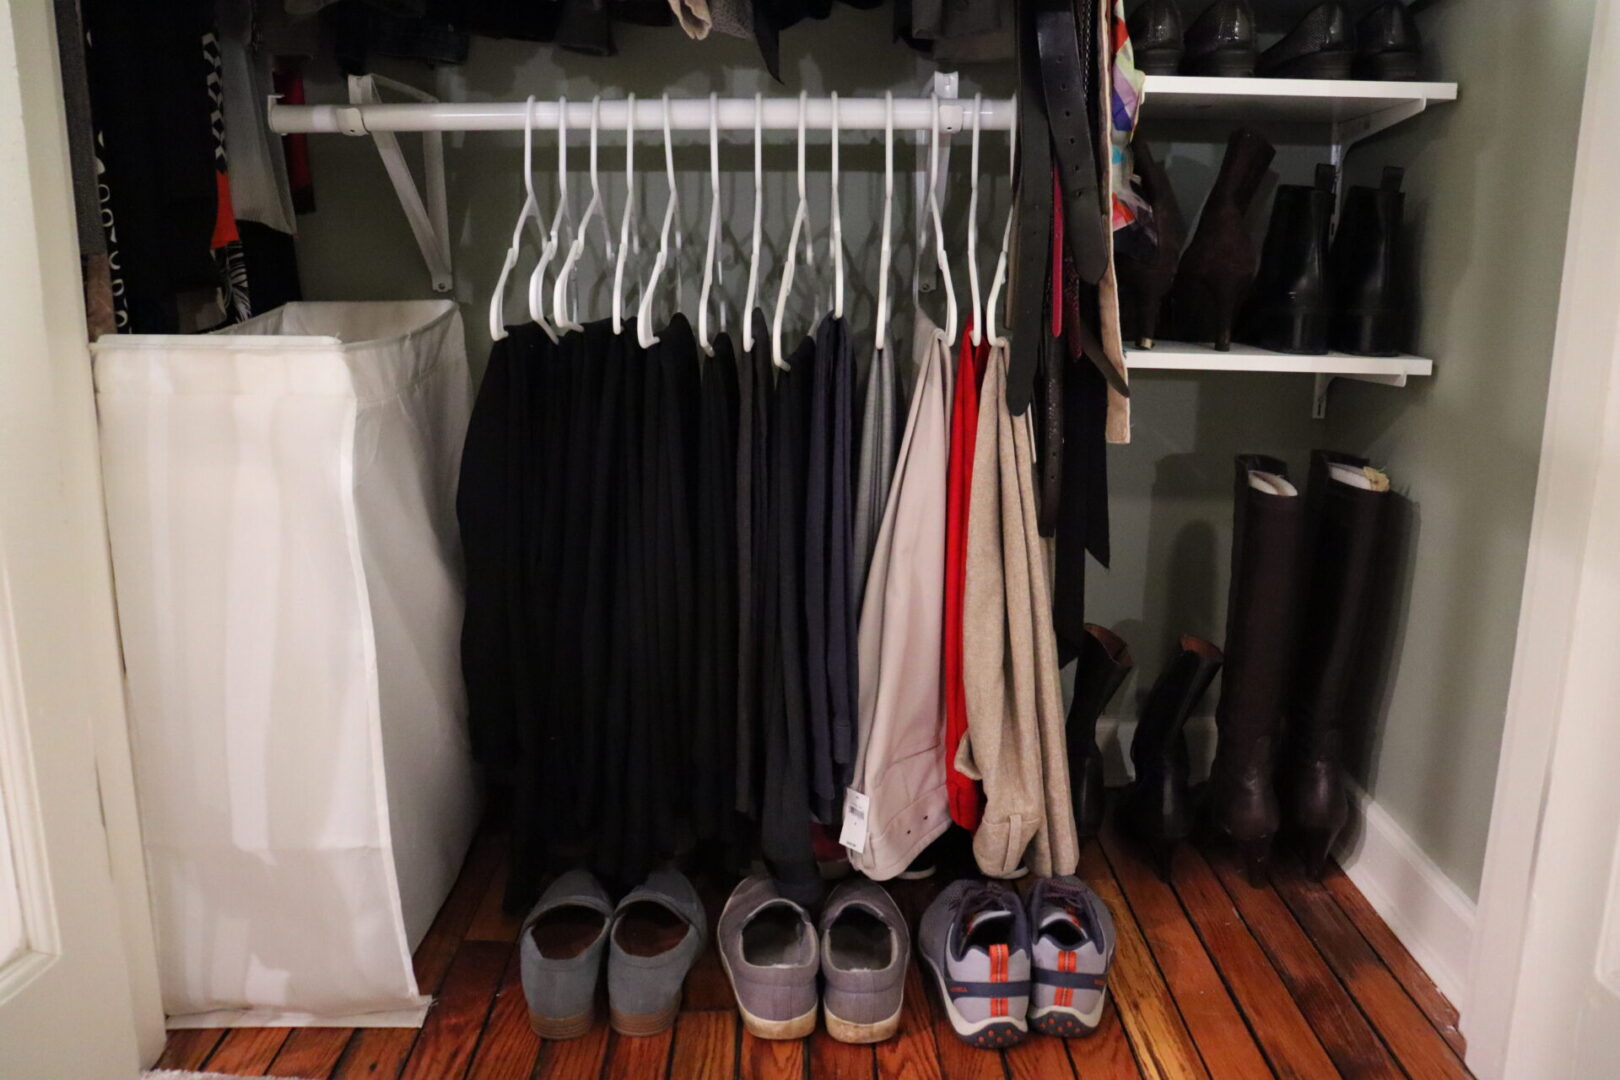 One level of hanged clothes next to a shoe dresser in a closet